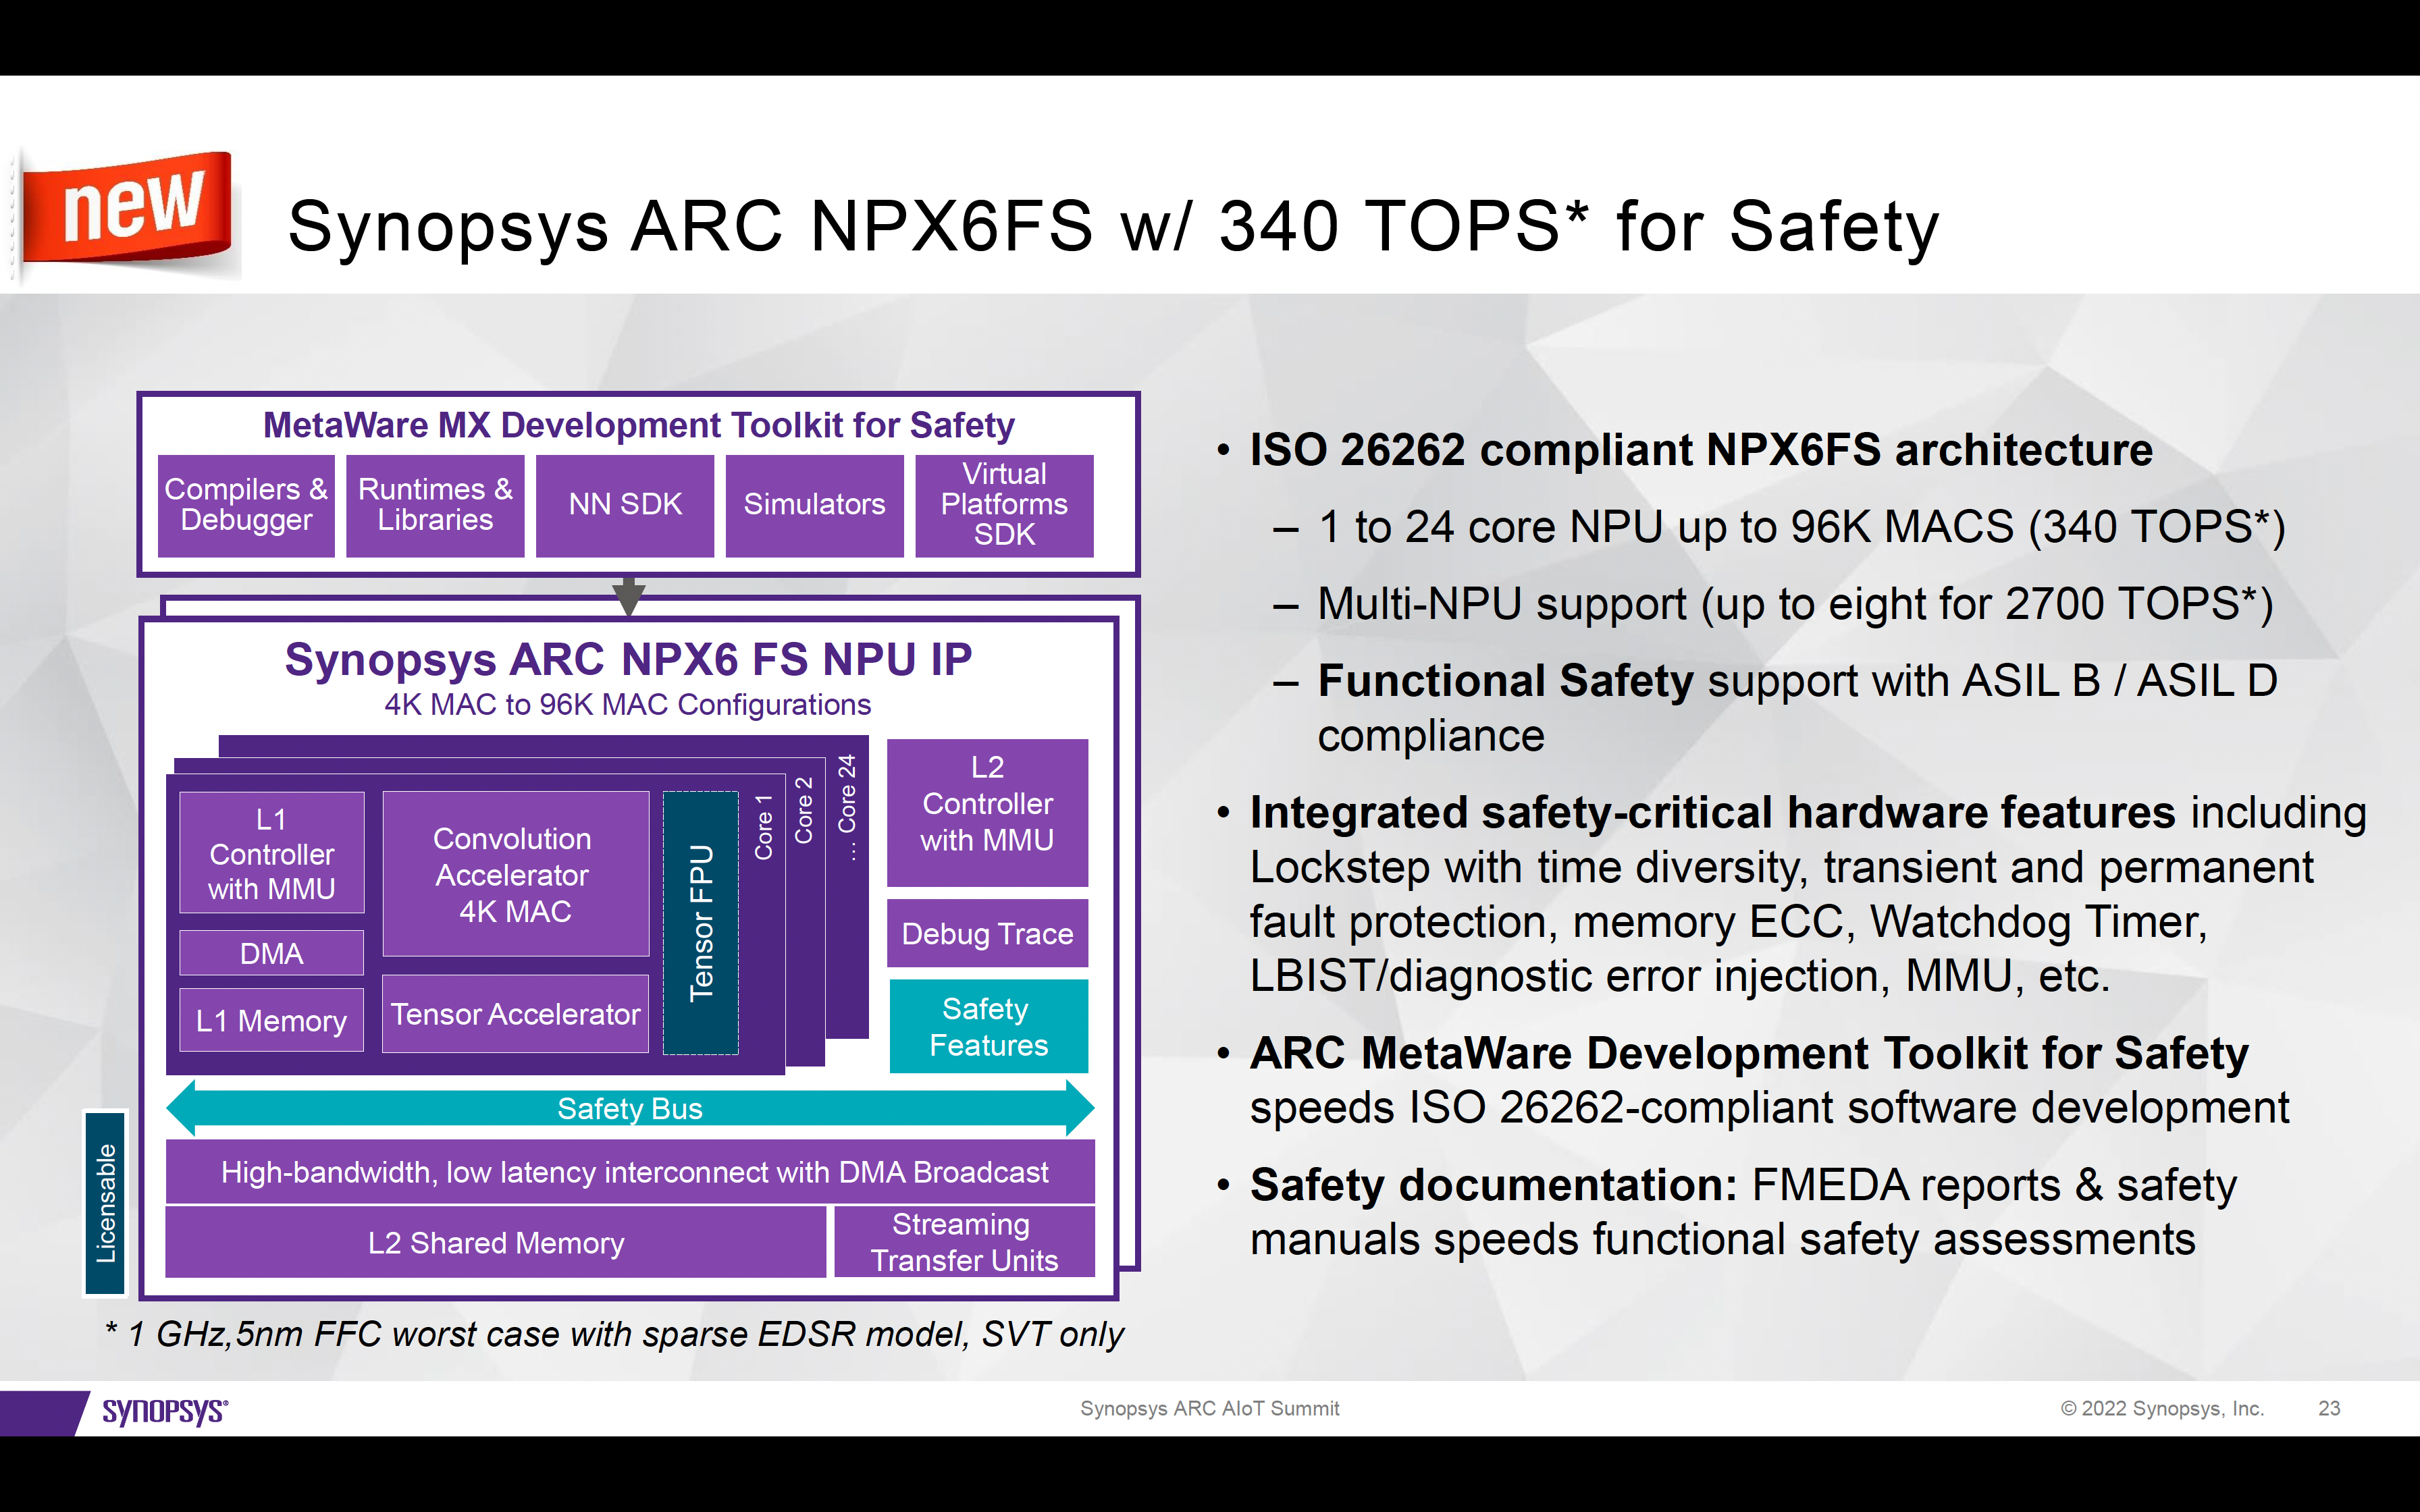 ARC NPX6FS with 340 TOPS for Safety